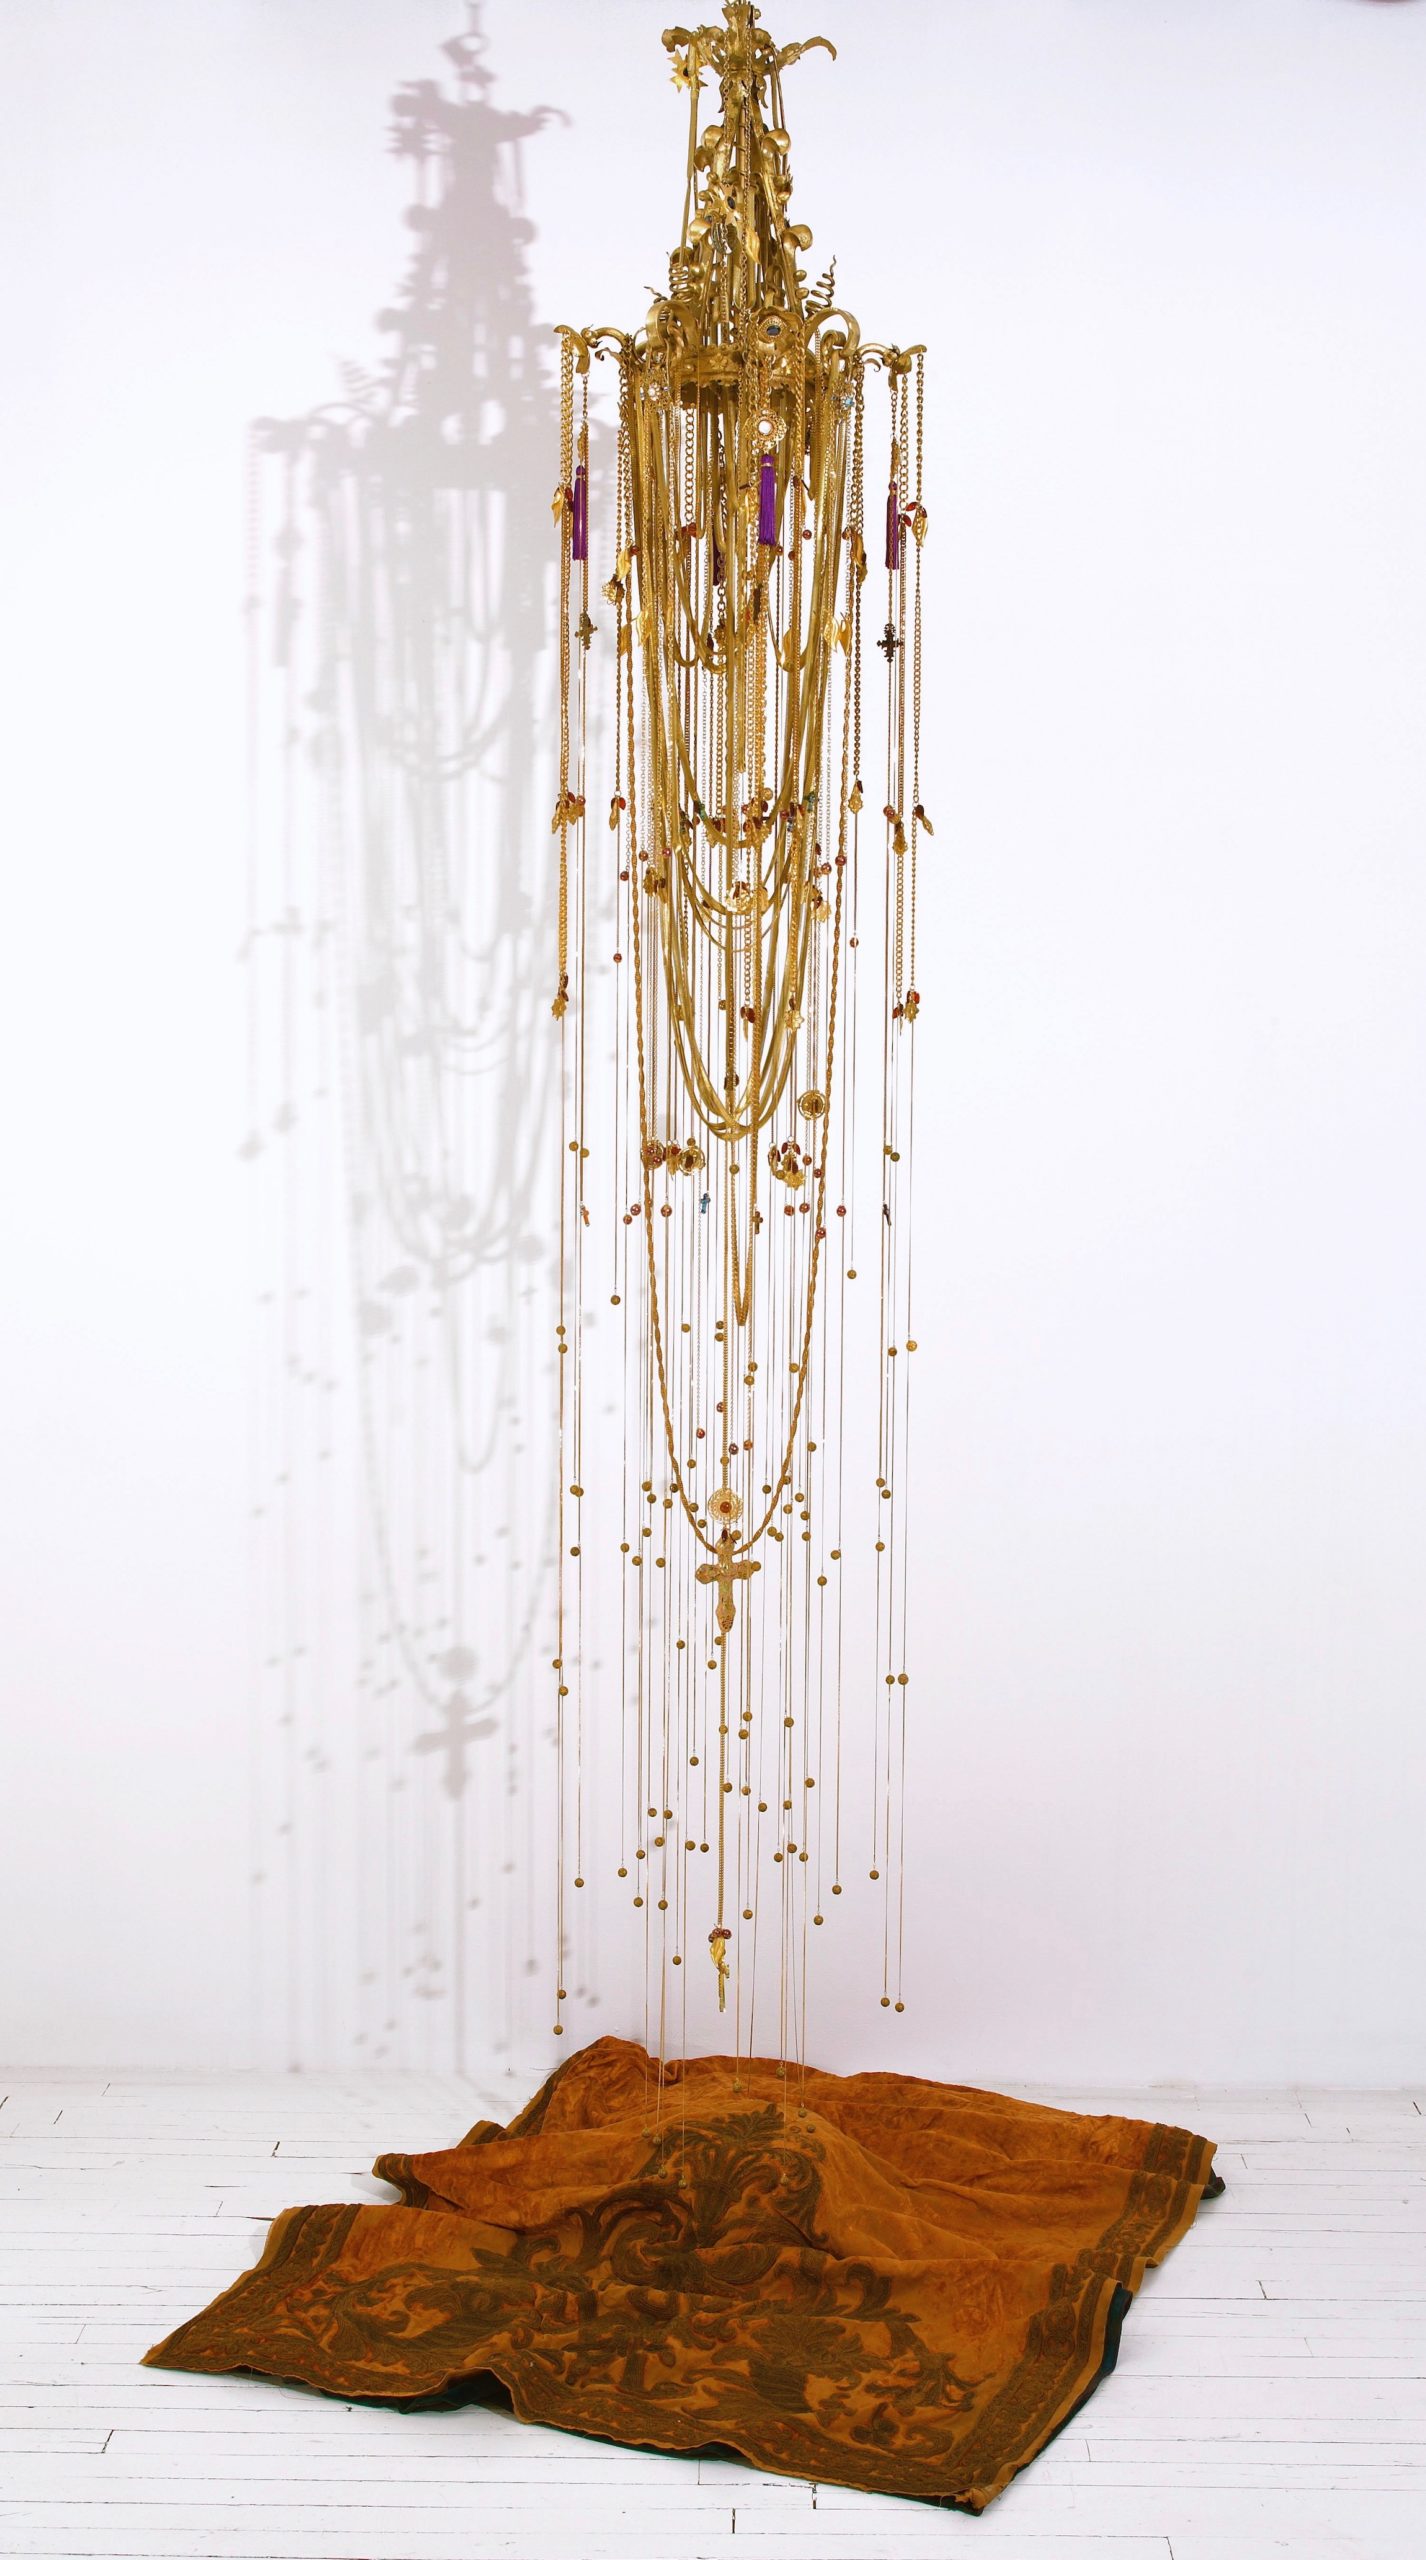 Esperanza Cortés; EMPIRE; 2016; Chandelier, gold leaf, 1000 feet of gold plated jewelry chain, gold plated metal leaves, brass beads, glass beads; 18' L x 6' Diameter. The history of colonial empire is the history of the Americas, specially places like my birthplace Colombia.